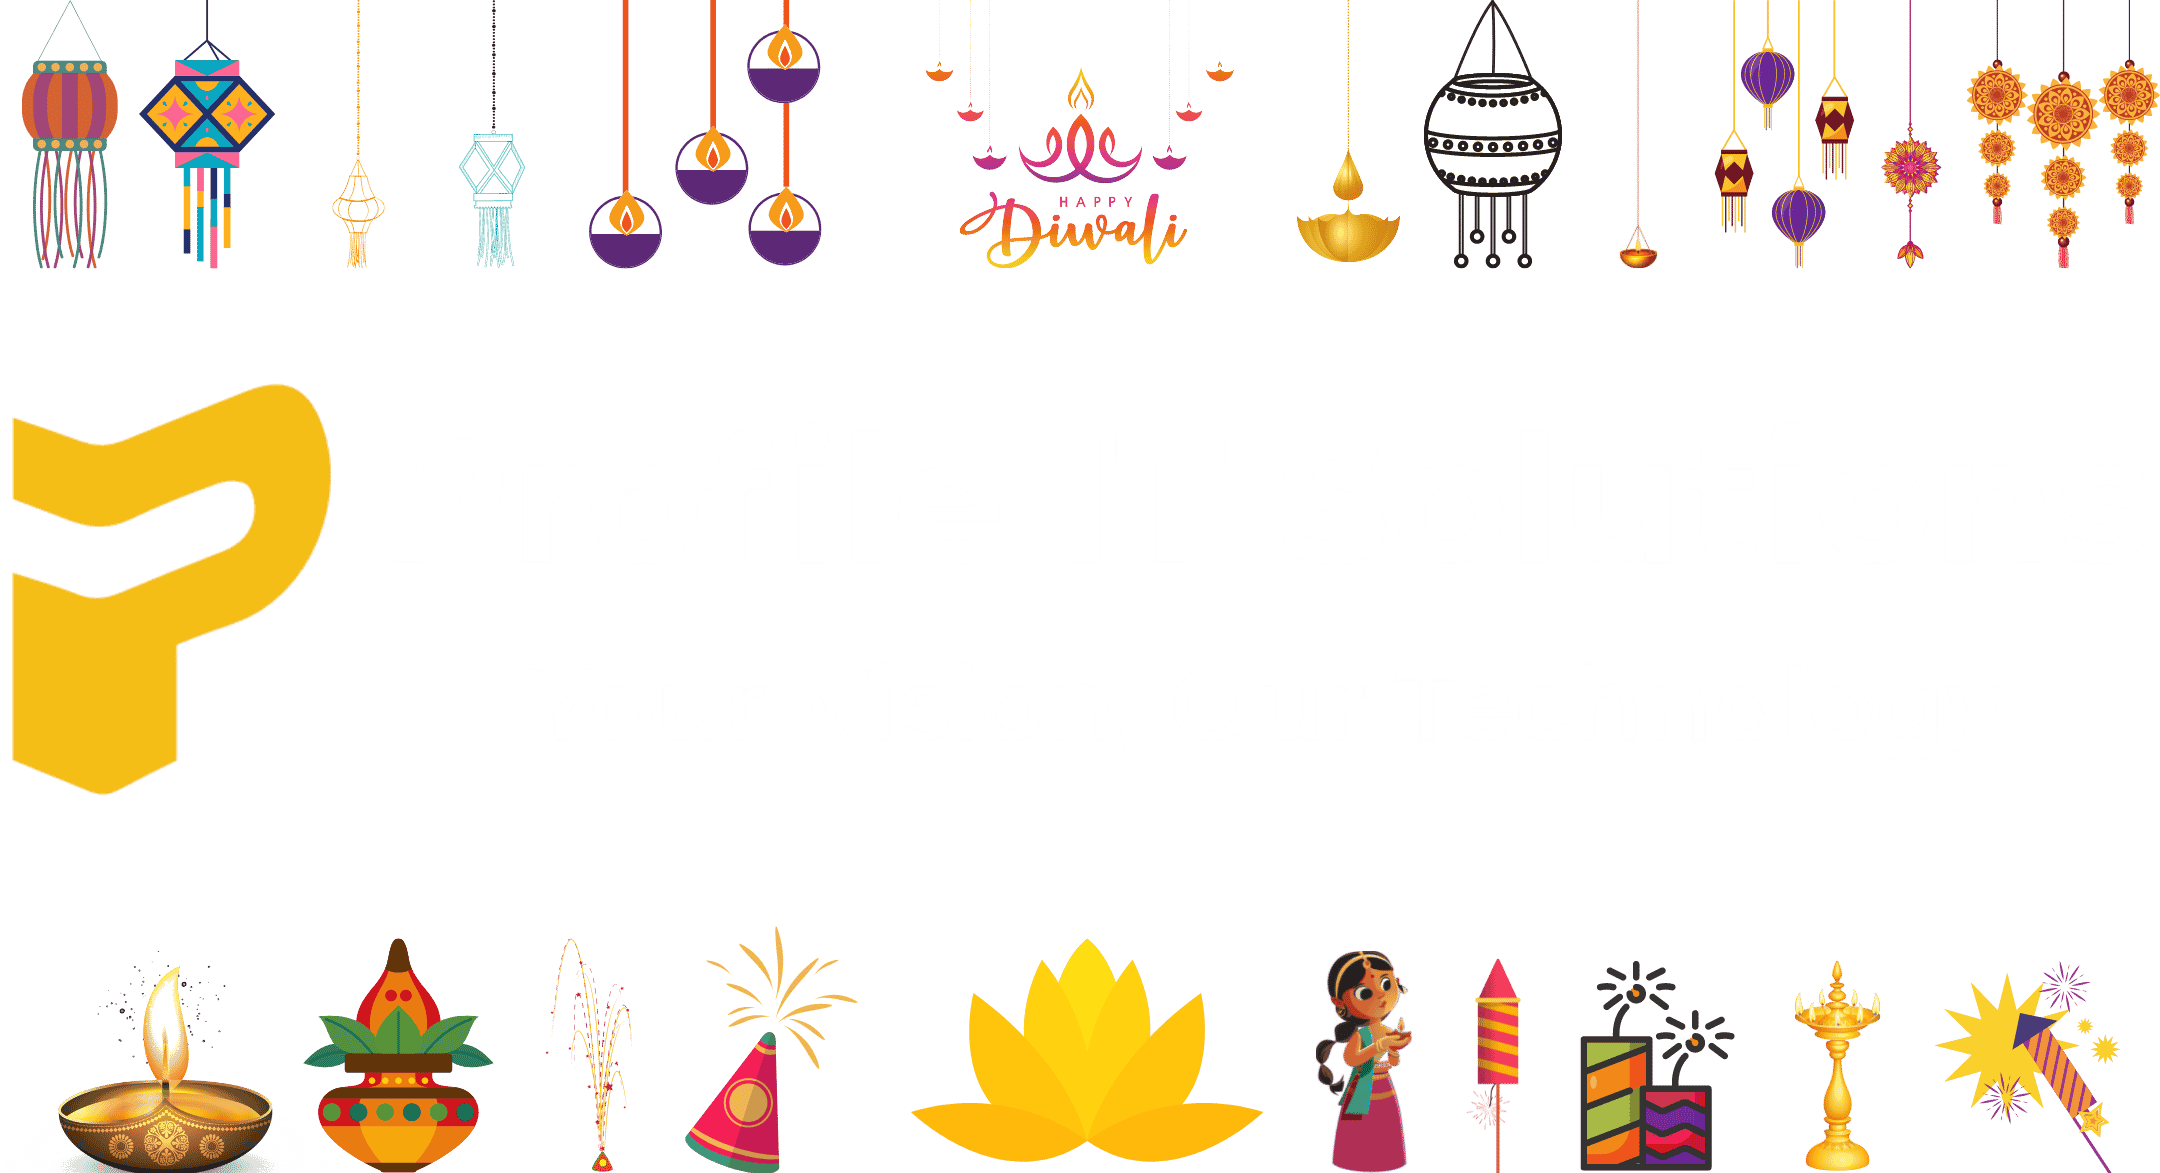 Profile IT Solutions